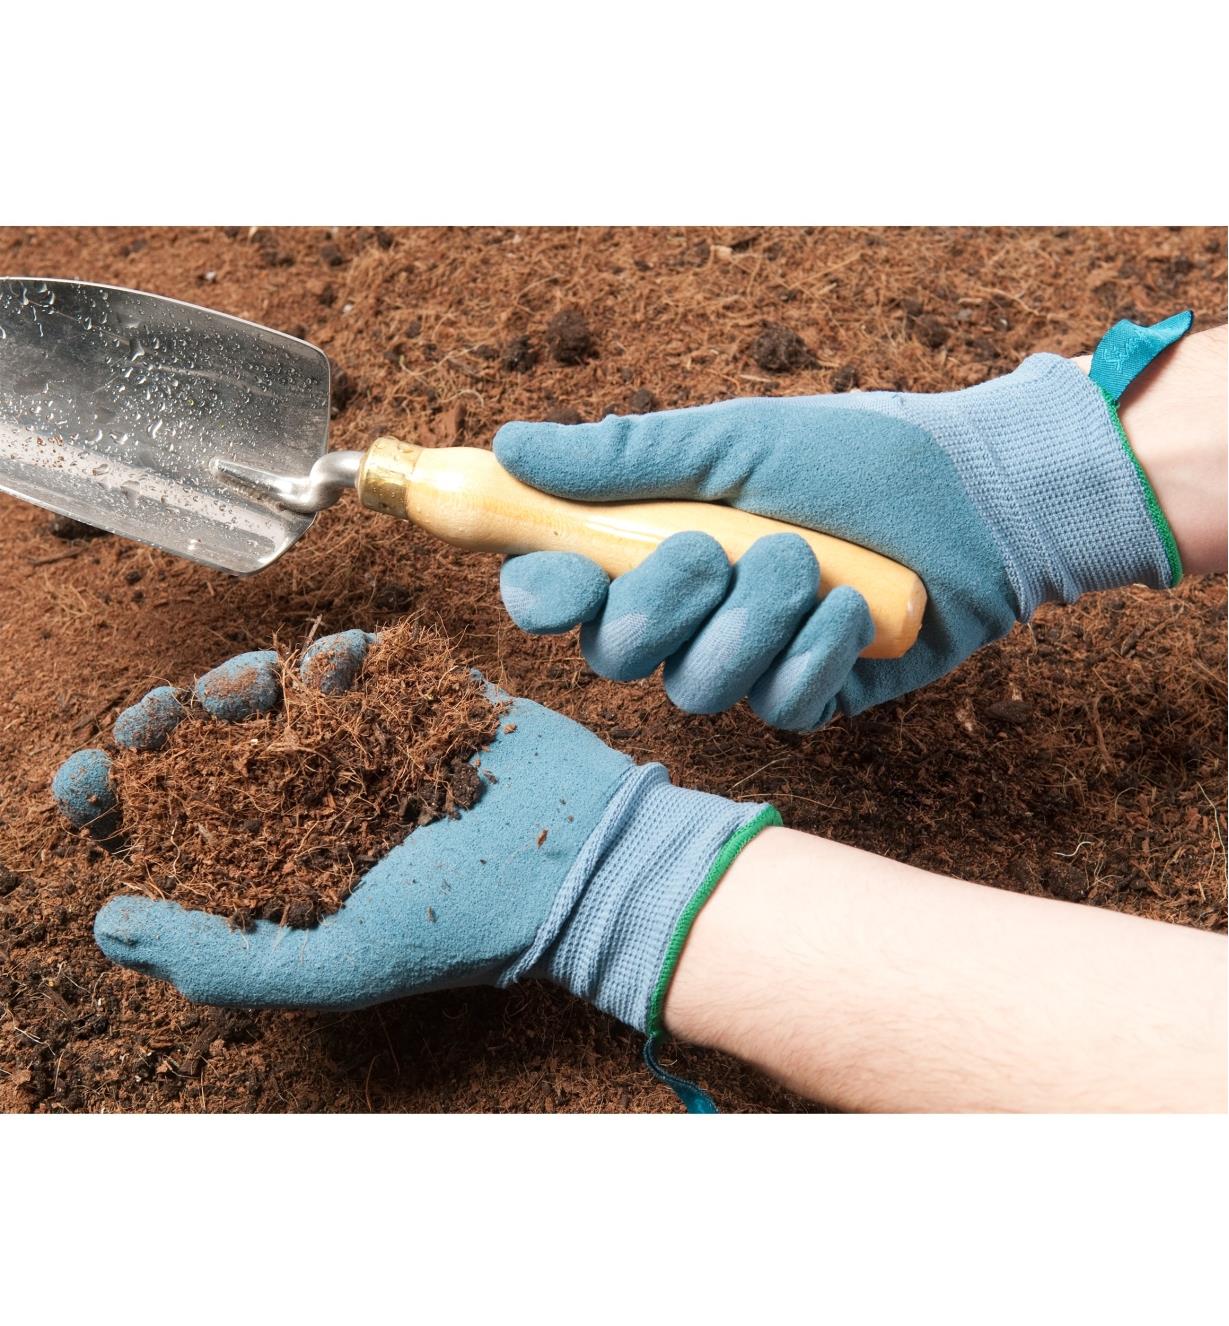 Digging in soil wearing the Lightweight Nitrile Gripper Gloves